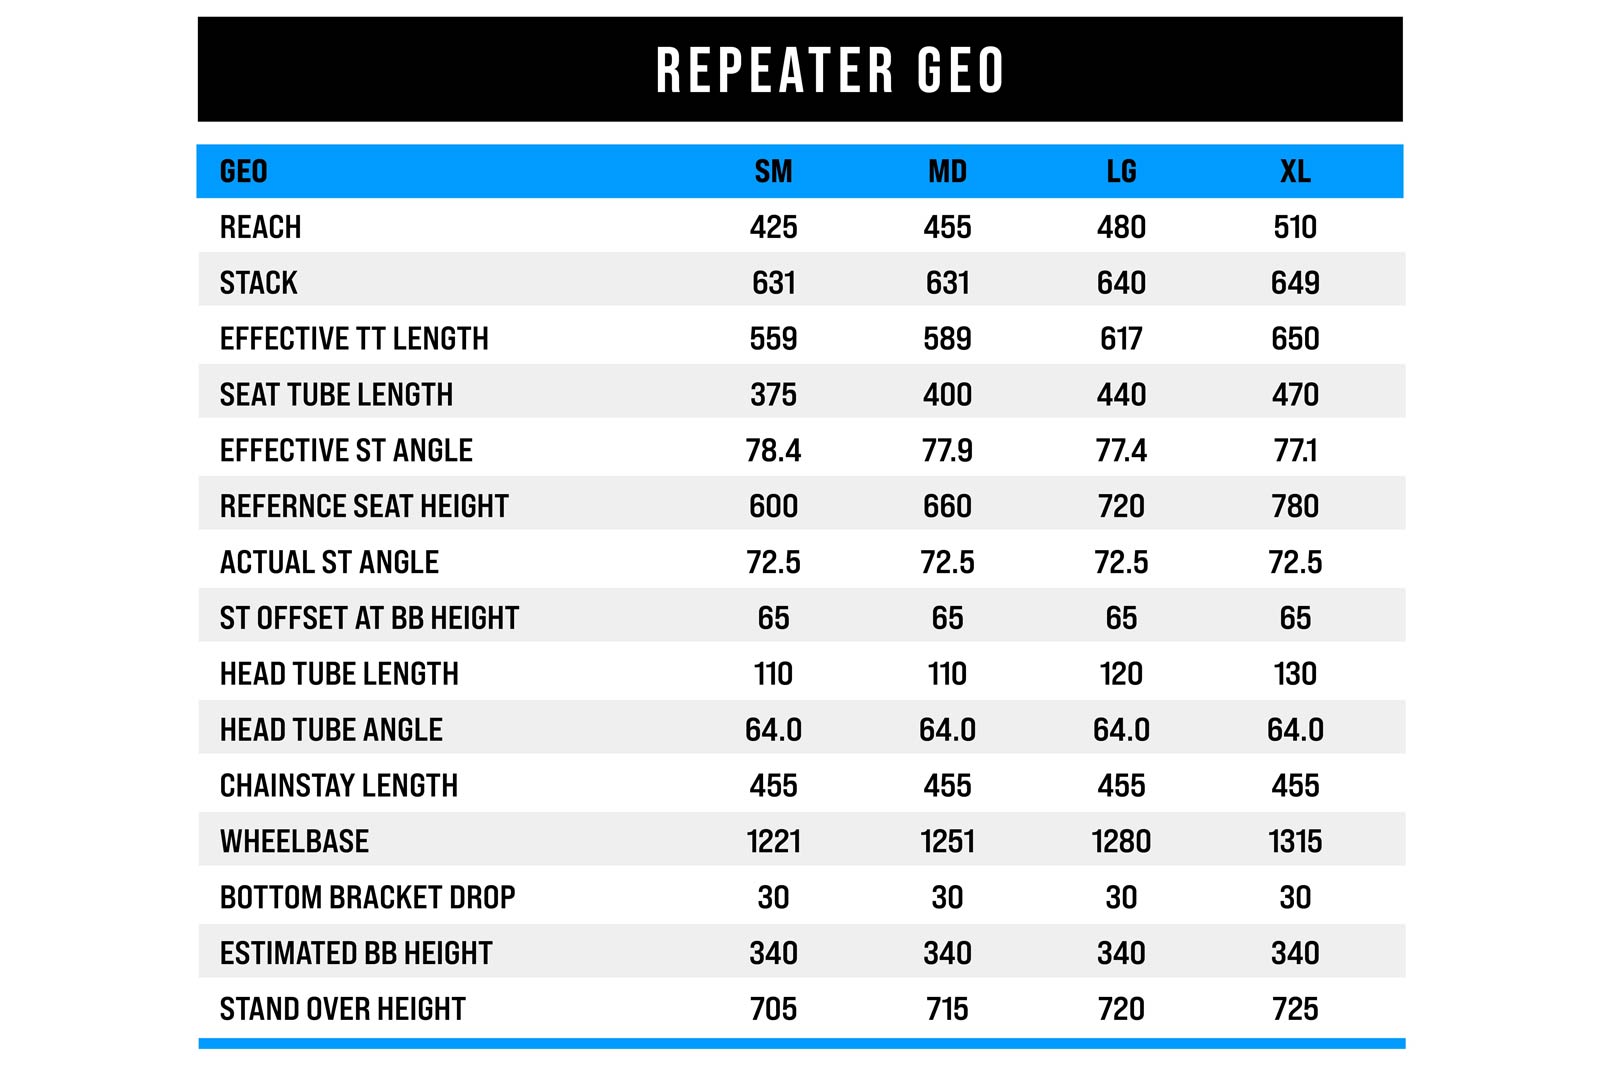 2022 transition repeater emtb geomtry chart